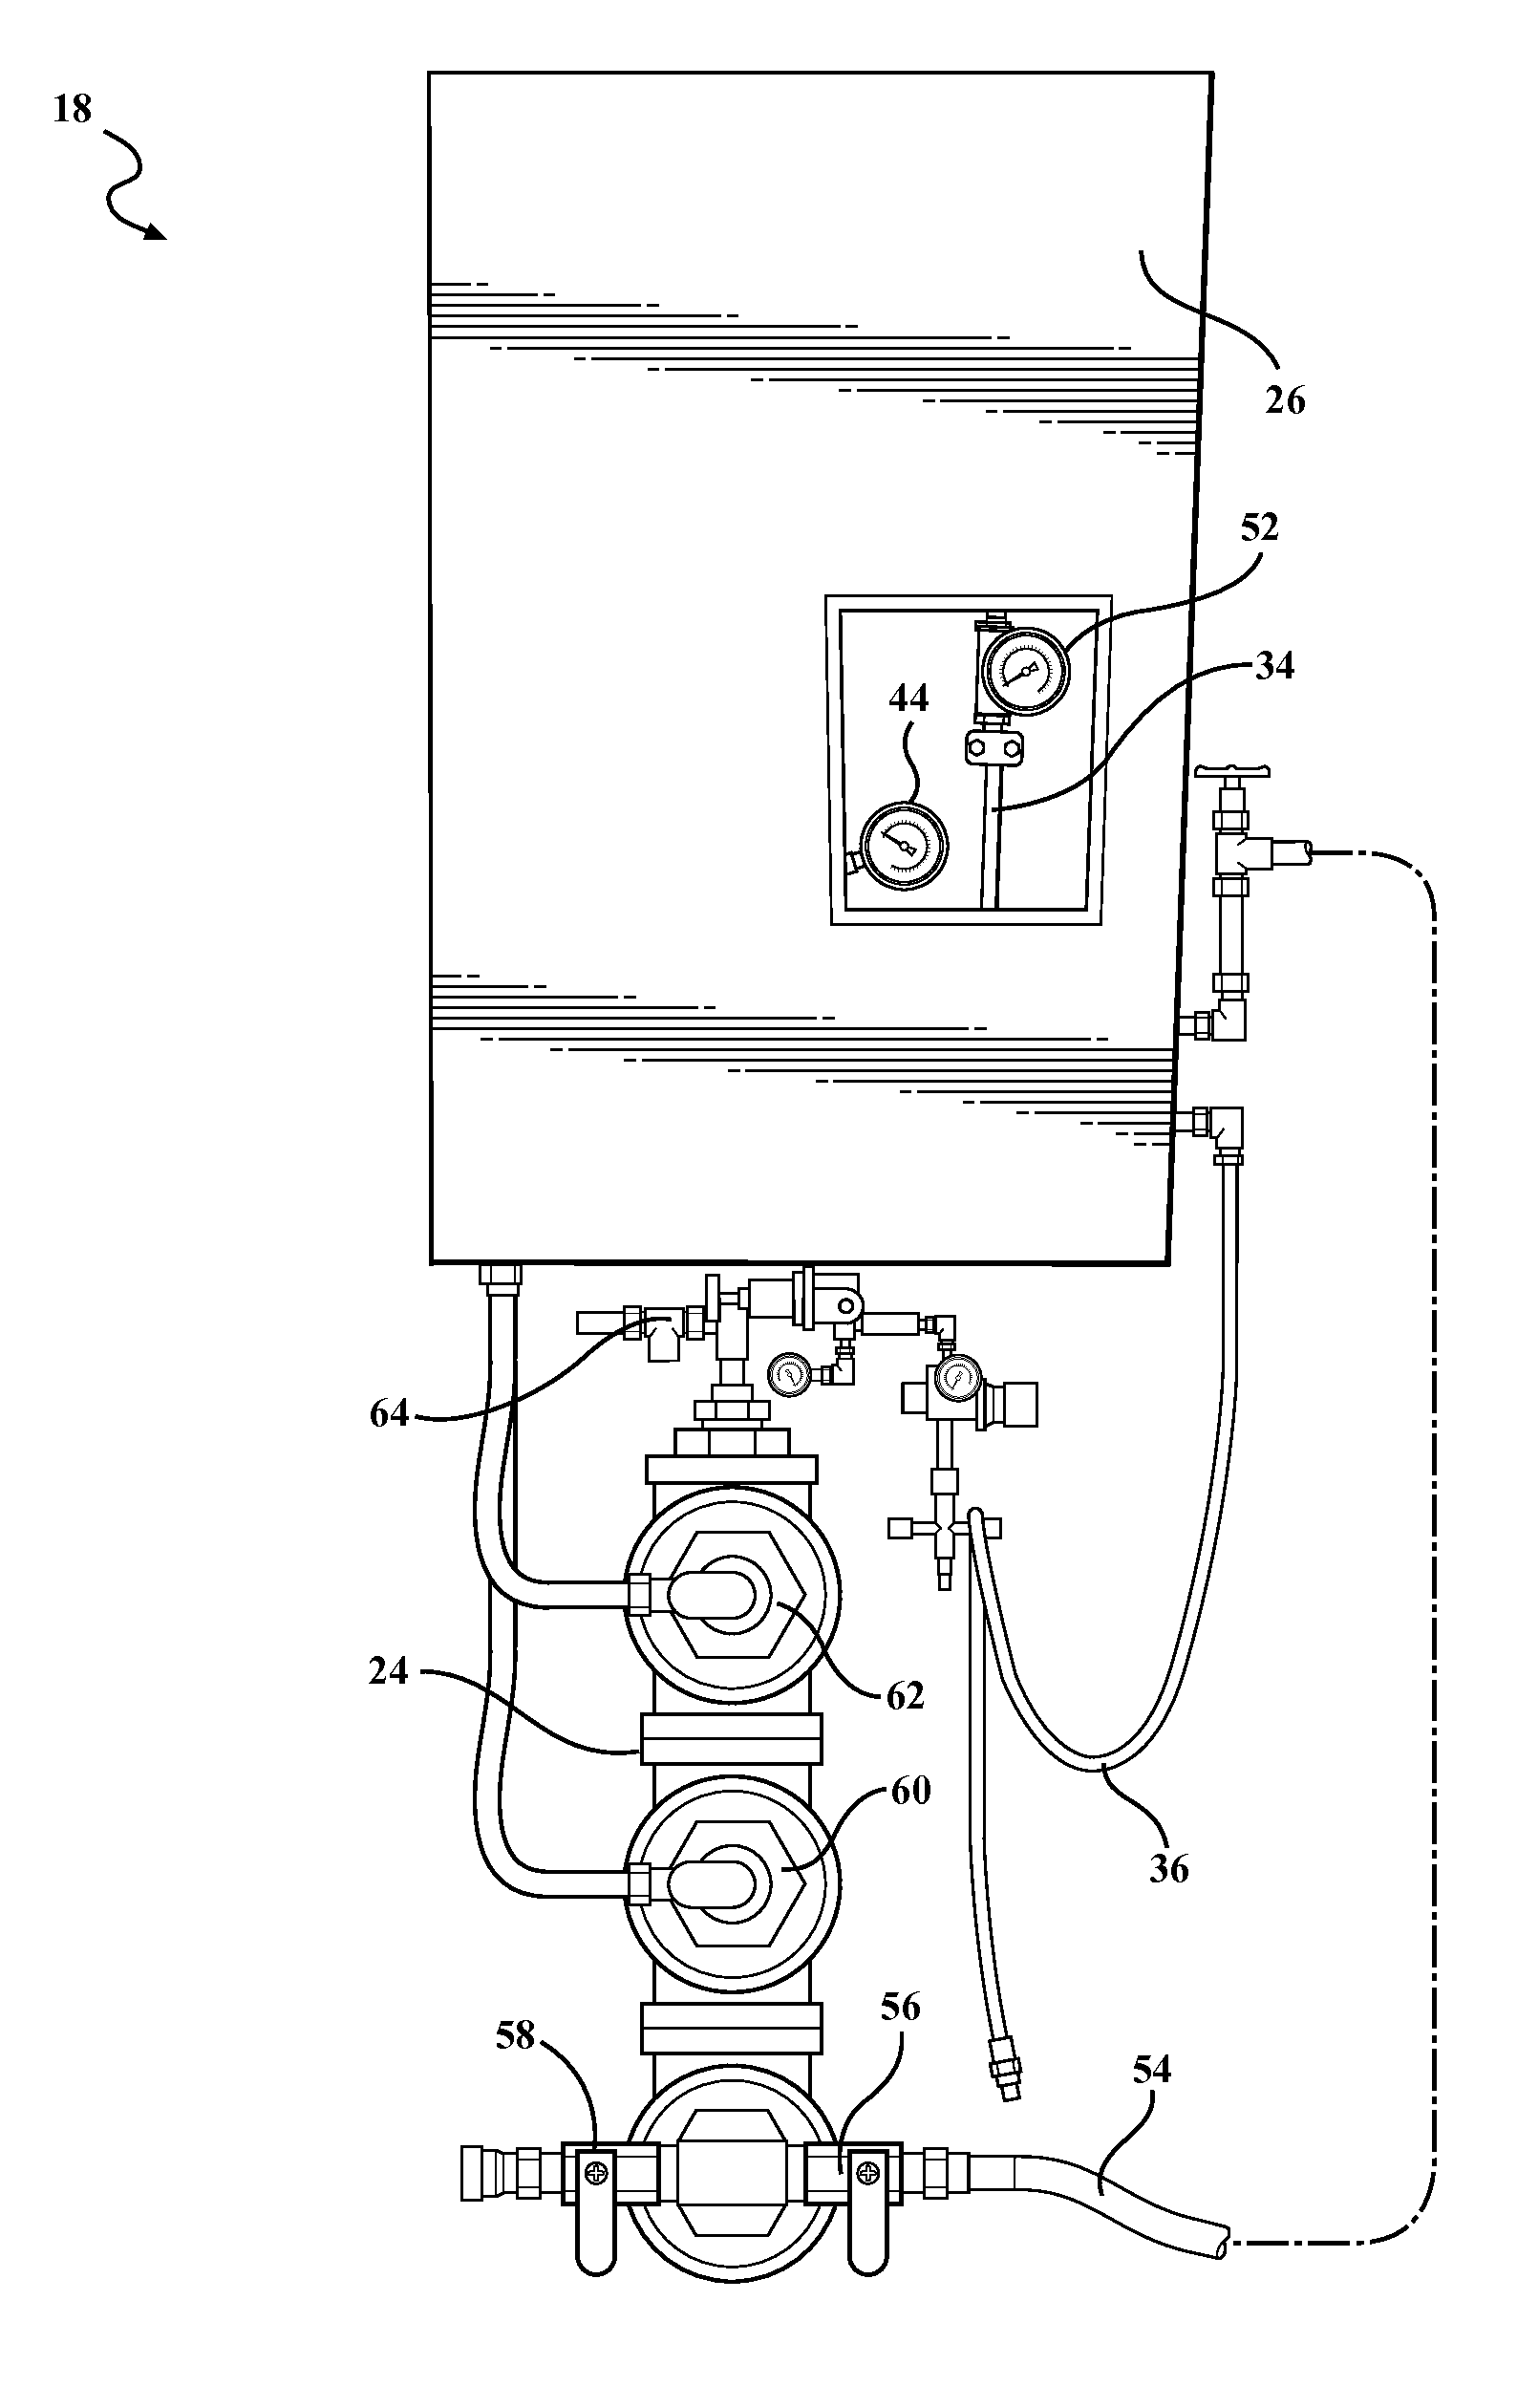 System And Method For Forming A Polyurethane Foam Including On Demand Introduction Of Additive To Resin Component